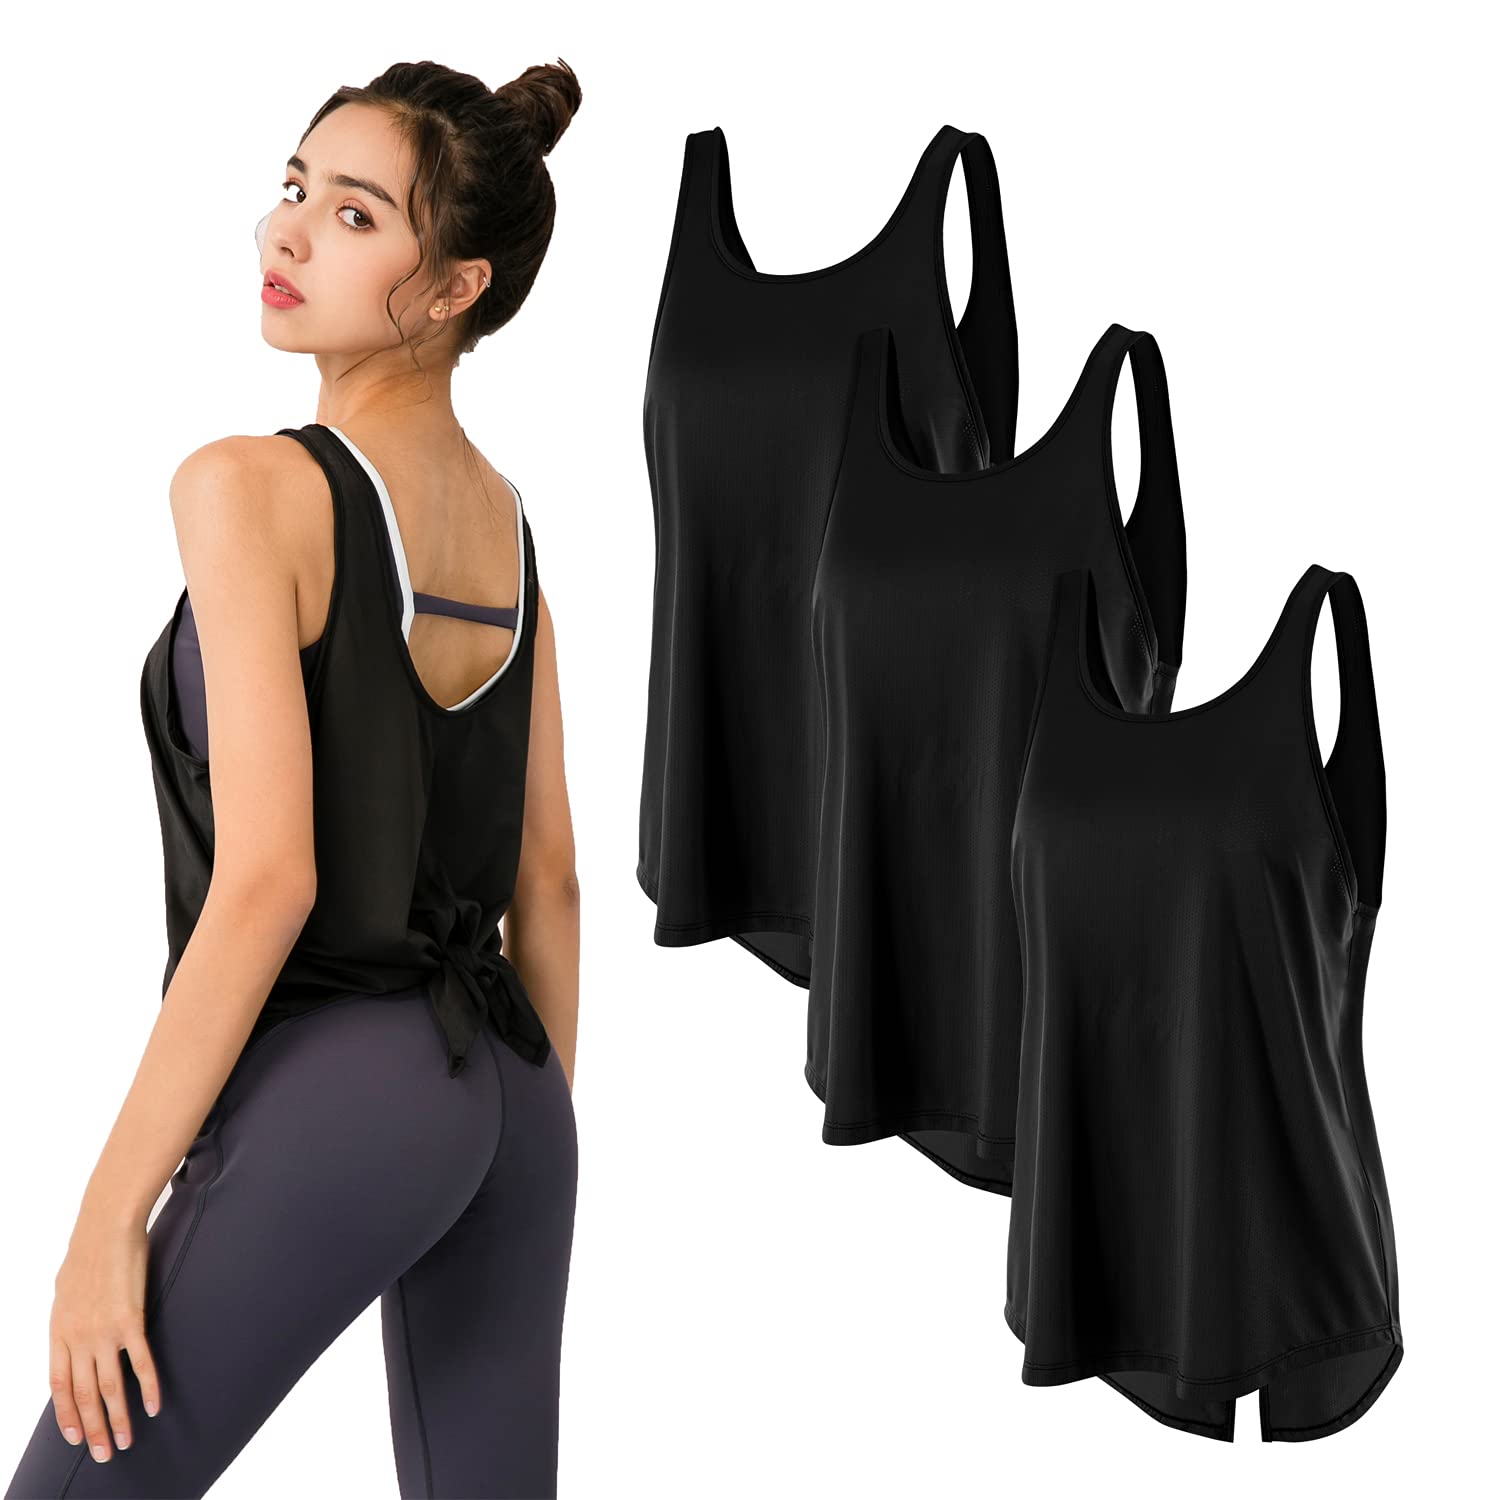 3 Pack Workout Tank Tops for Women Gym Exercise Athletic Yoga Tops